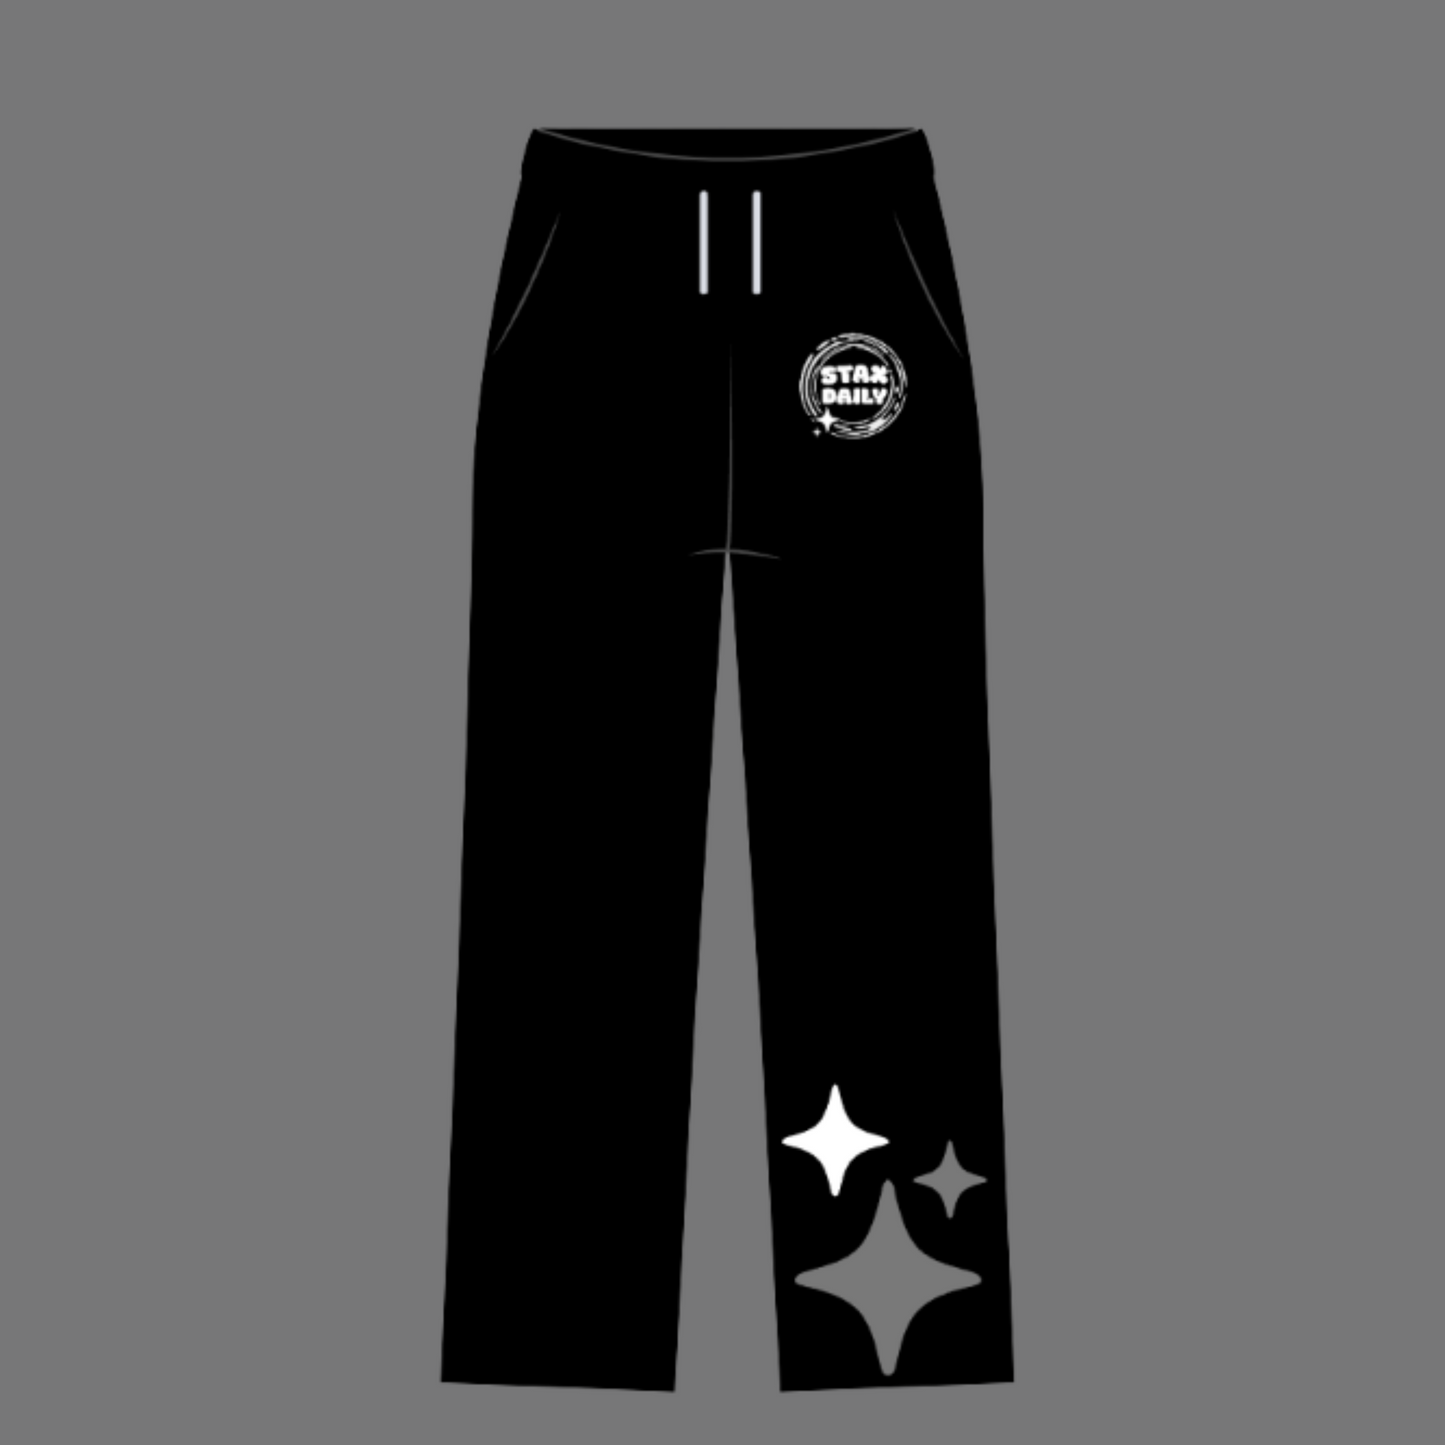 STAX DAILY BLACK BOTTOMS (PRE ORDER!!)